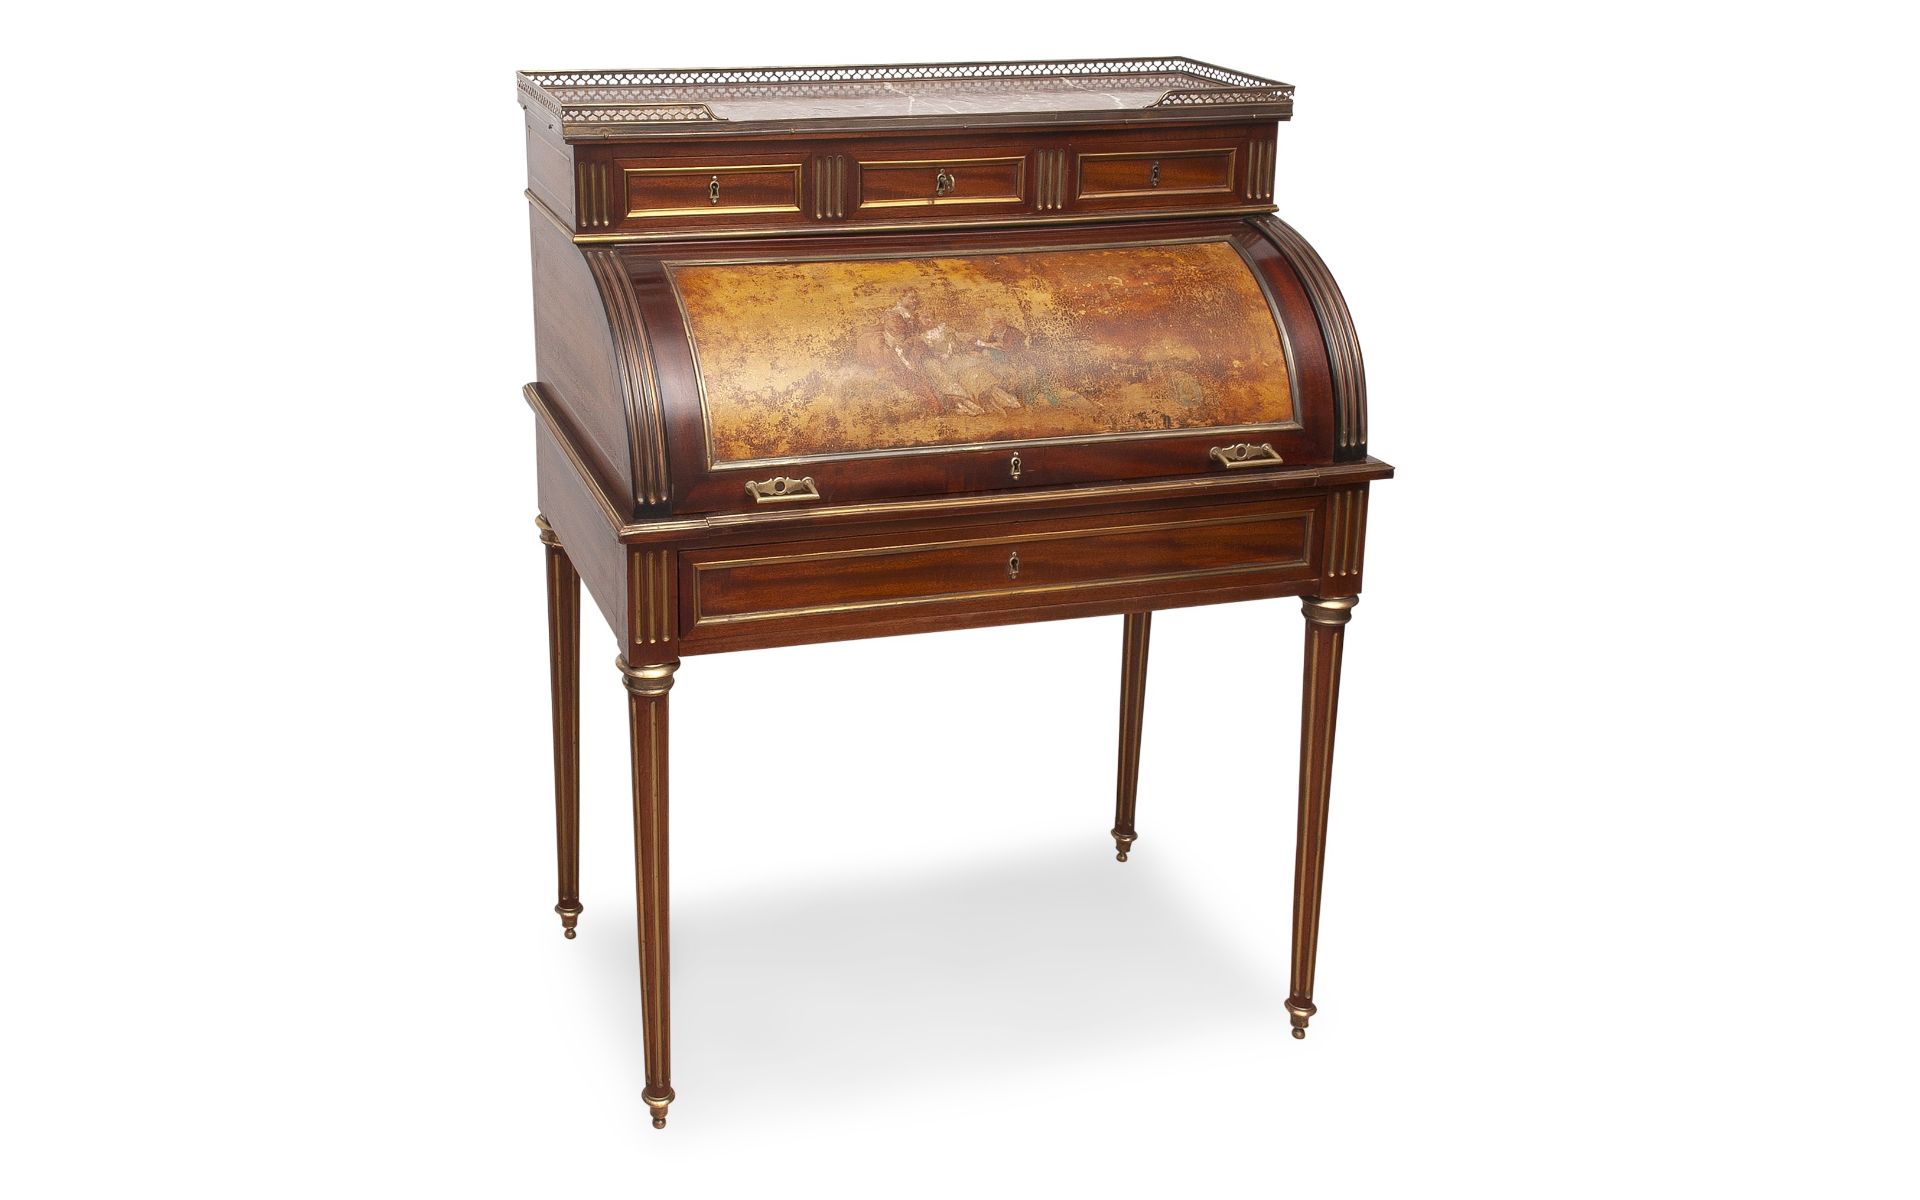 AN EARLY 20TH CENTURY FRENCH MAHOGANY AND VERNIS MARTIN CYLINDER BUREAU